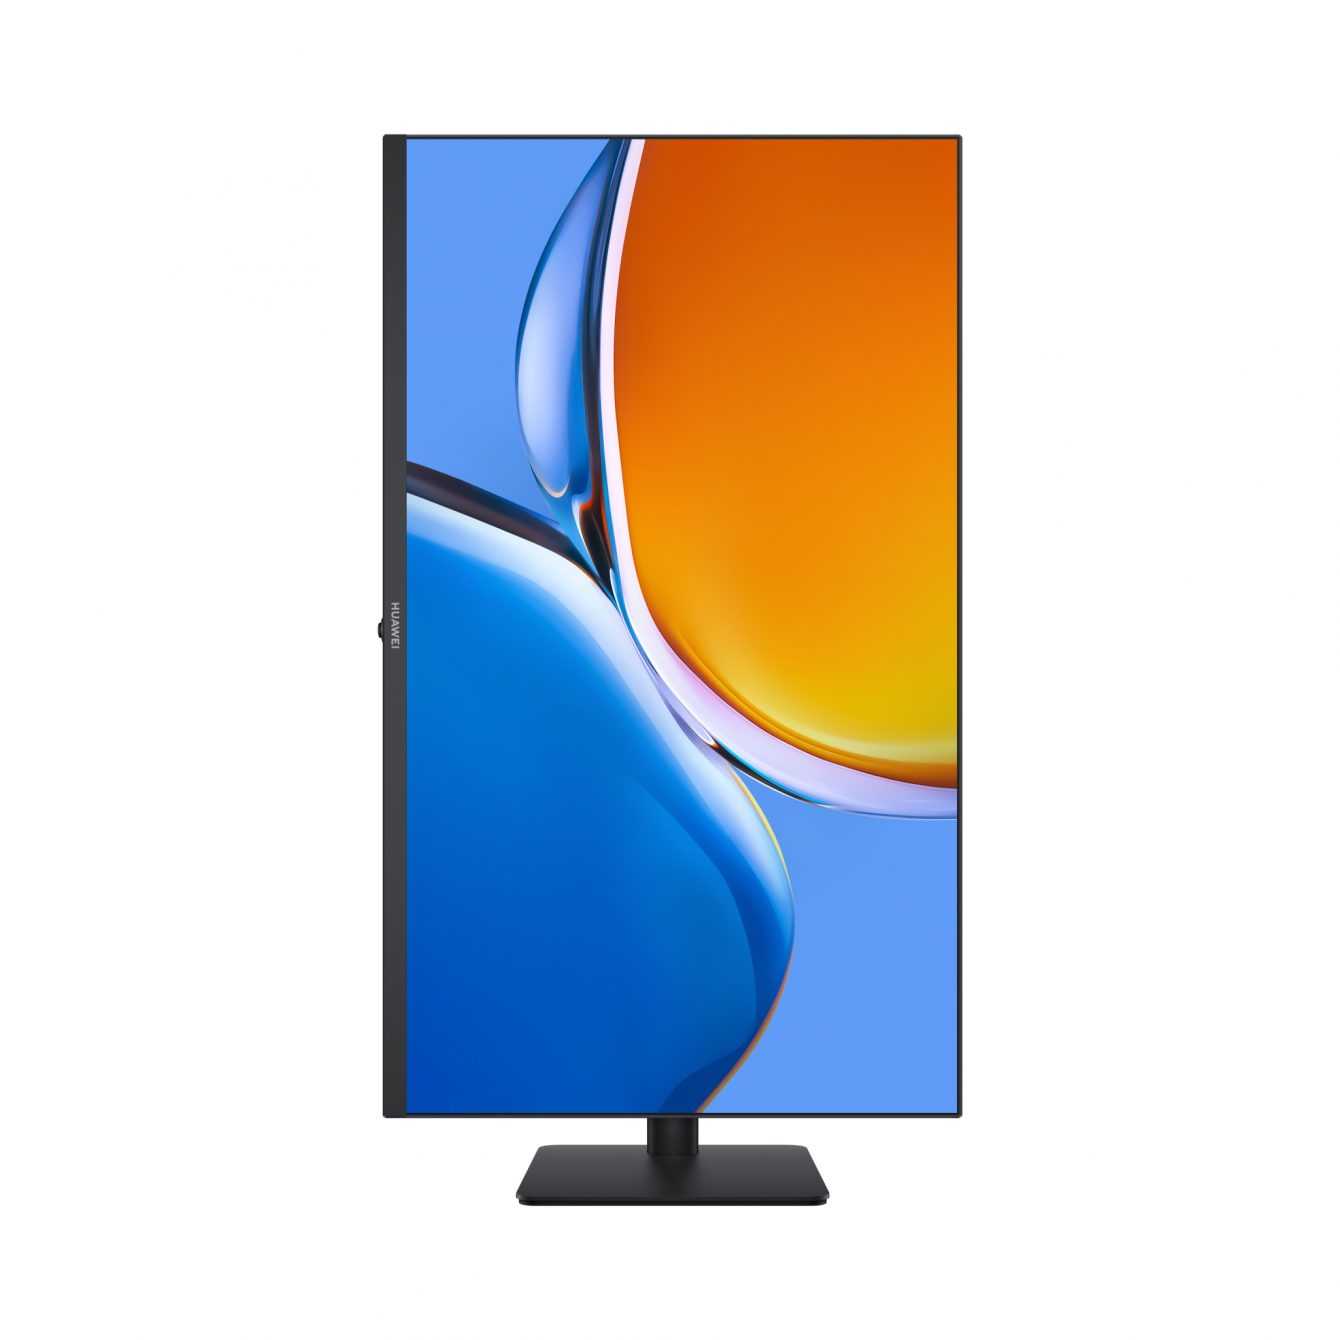 Huawei: introduces its new MateView SE monitor